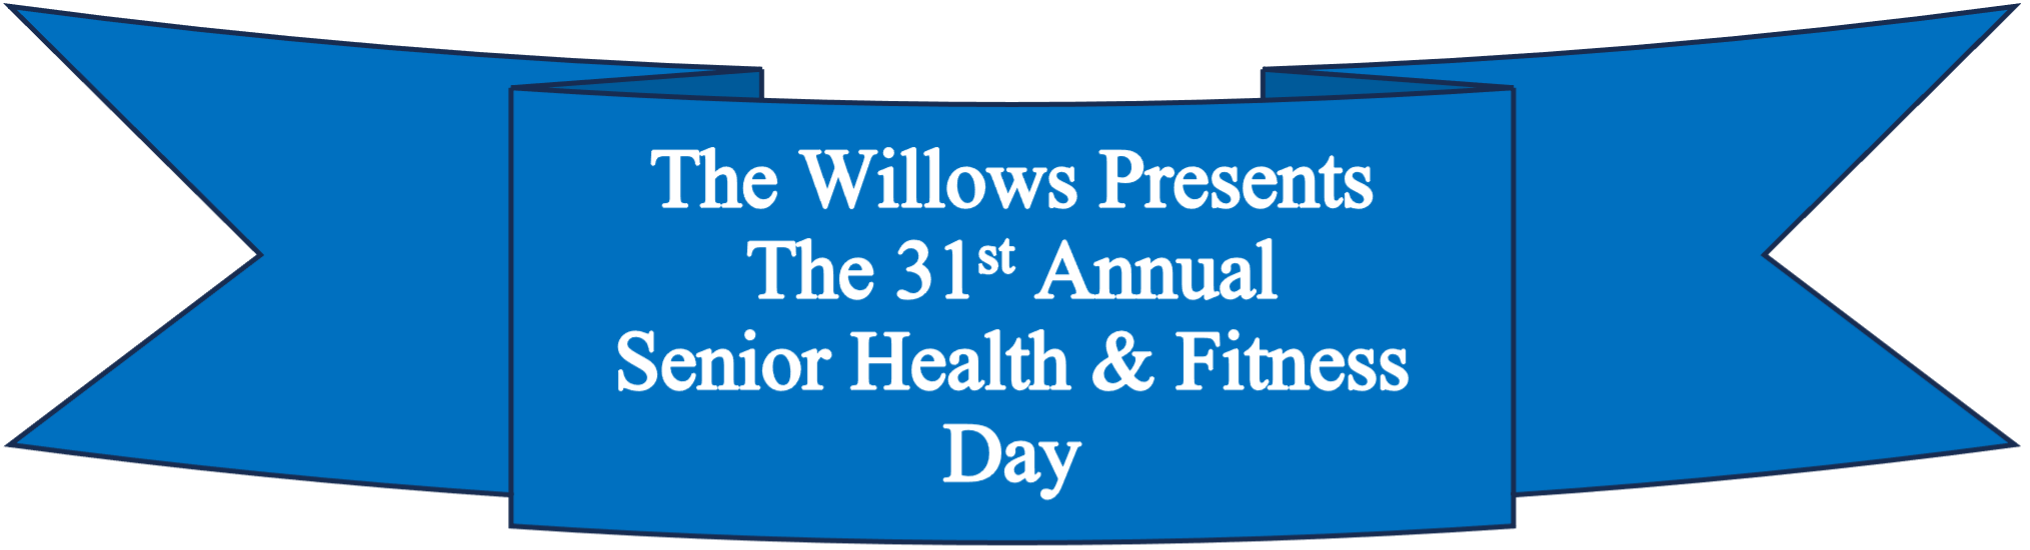 The WIllows Presents the 31st Annual Senior Health & Fitness Day